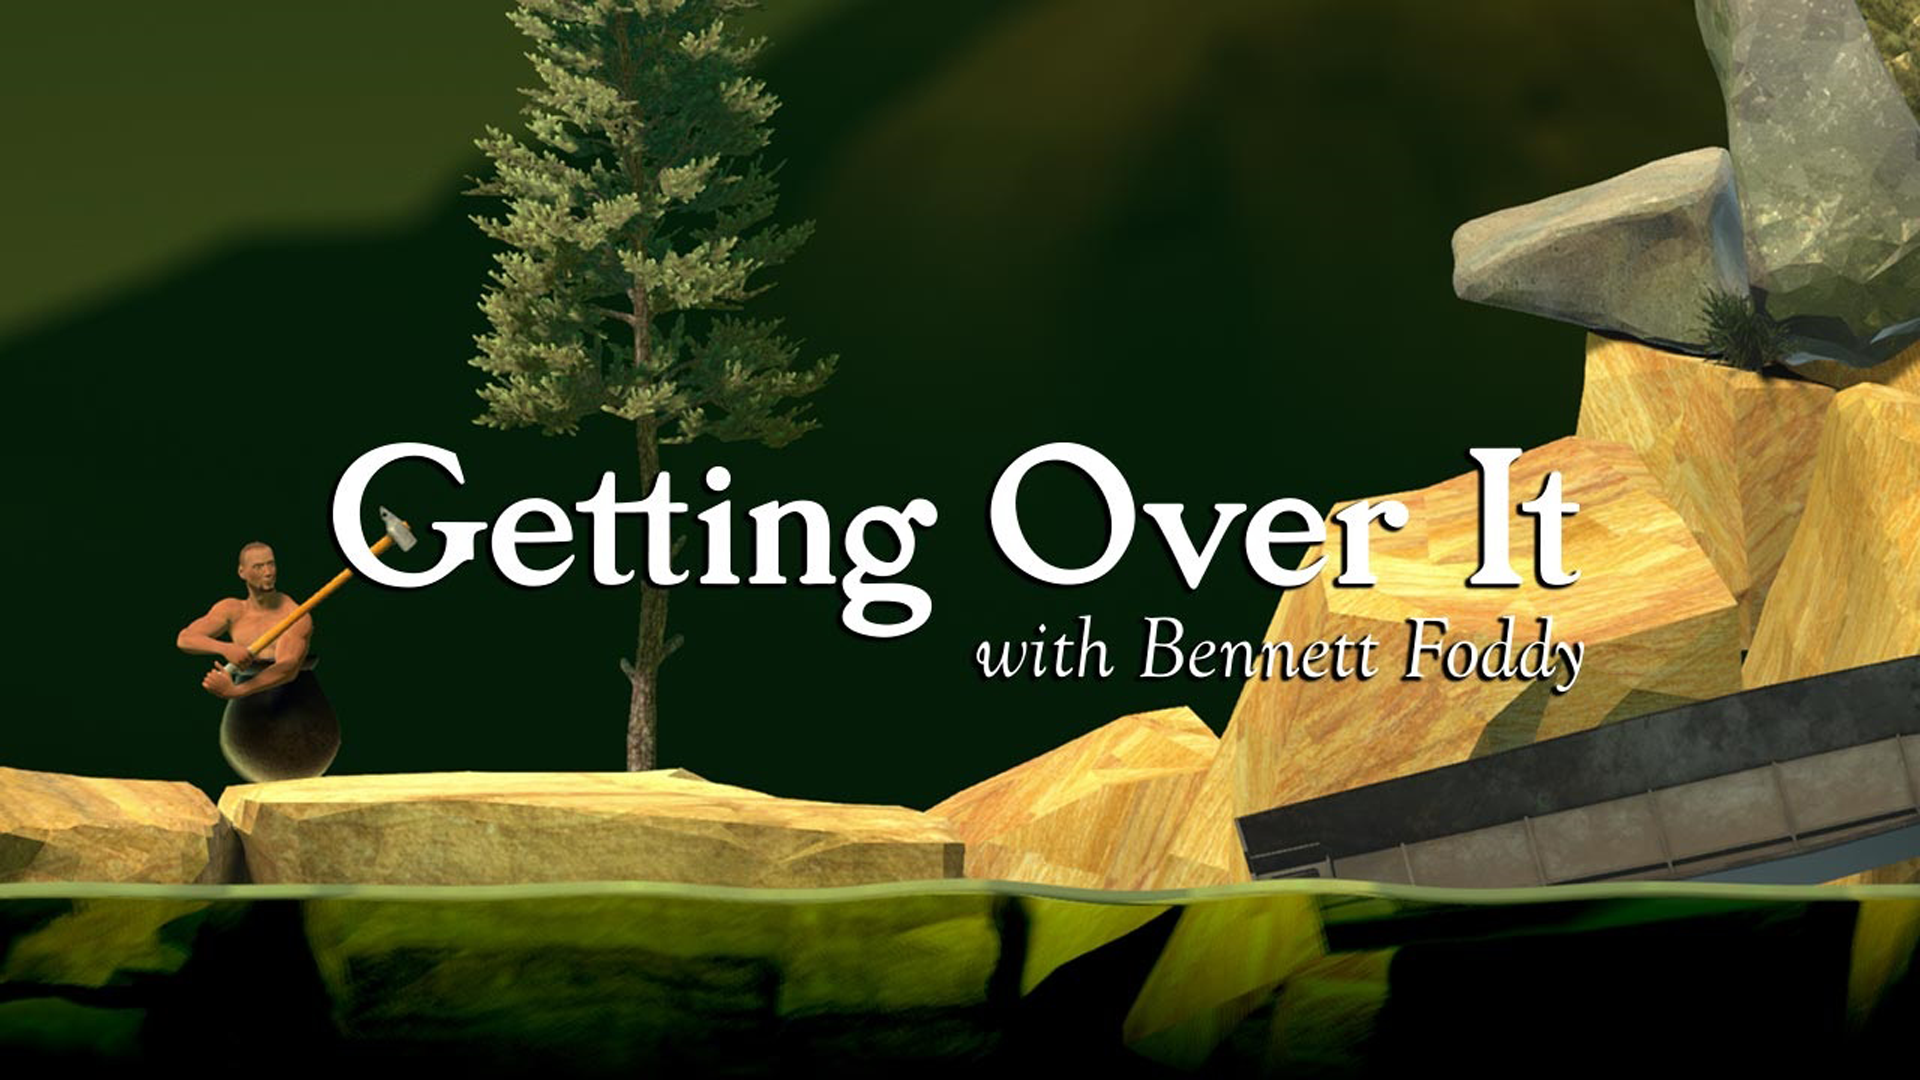 Playing an hour of Getting Over It with Bennett Foddy (Steam)